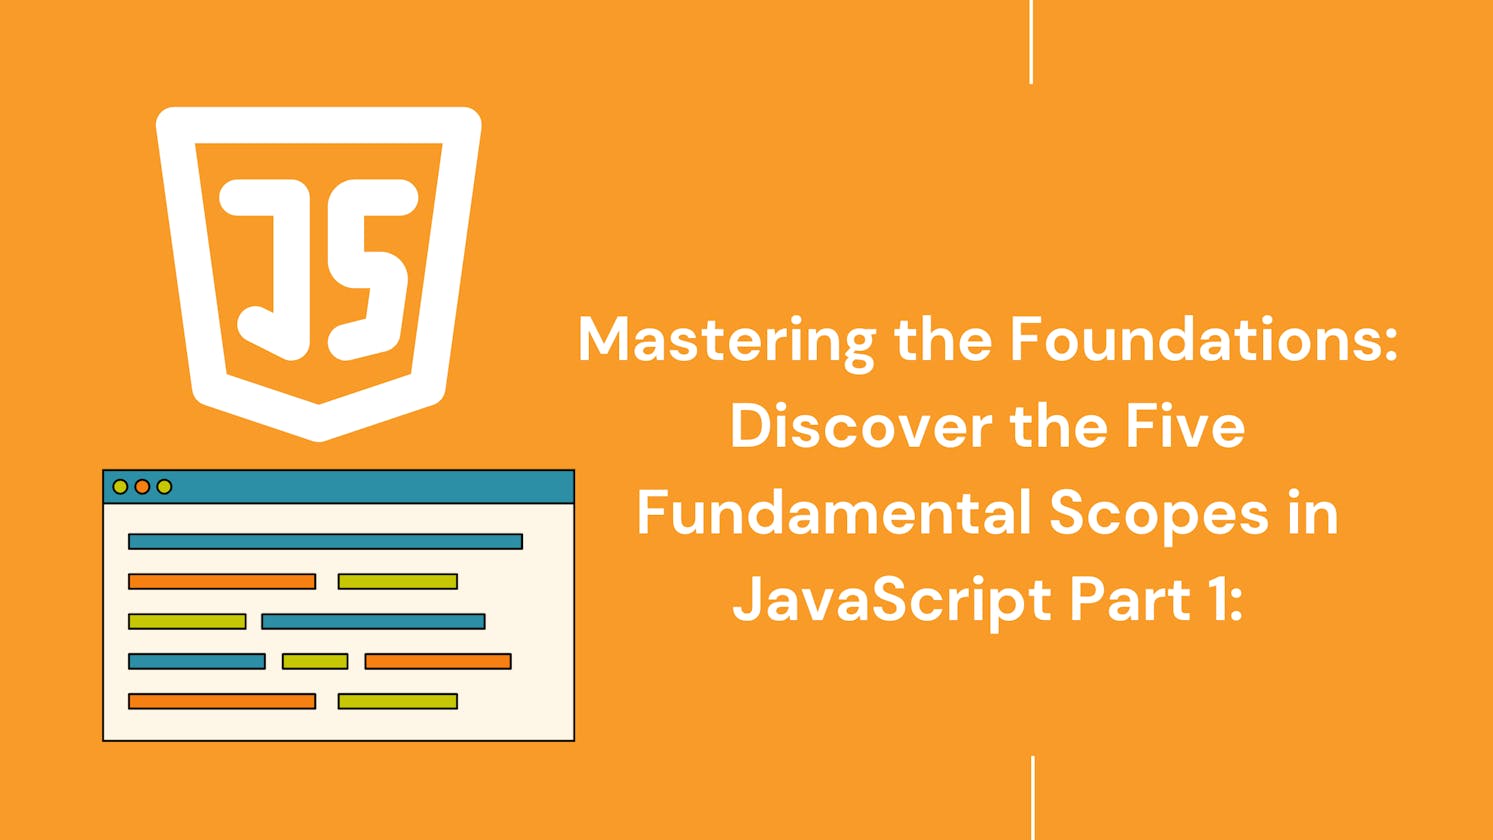 Mastering the Foundations: Discover the Five Fundamental Scopes in JavaScript, Part 1: